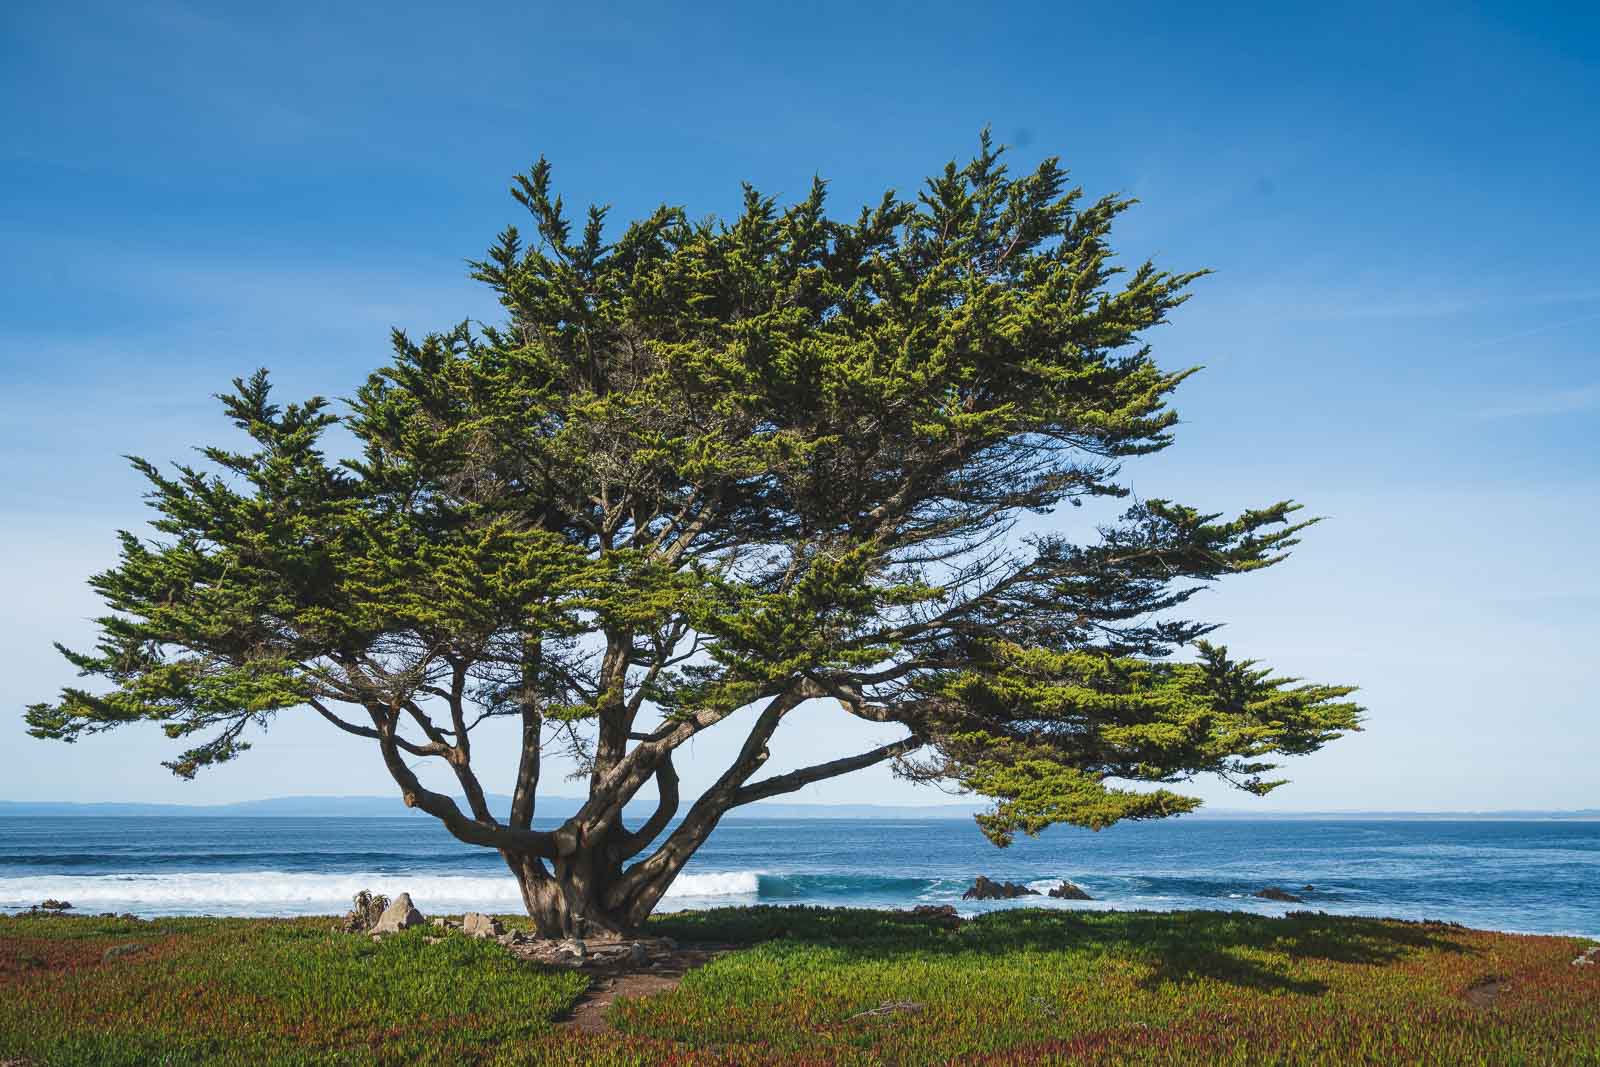 Things to do in Carmel By the Sea